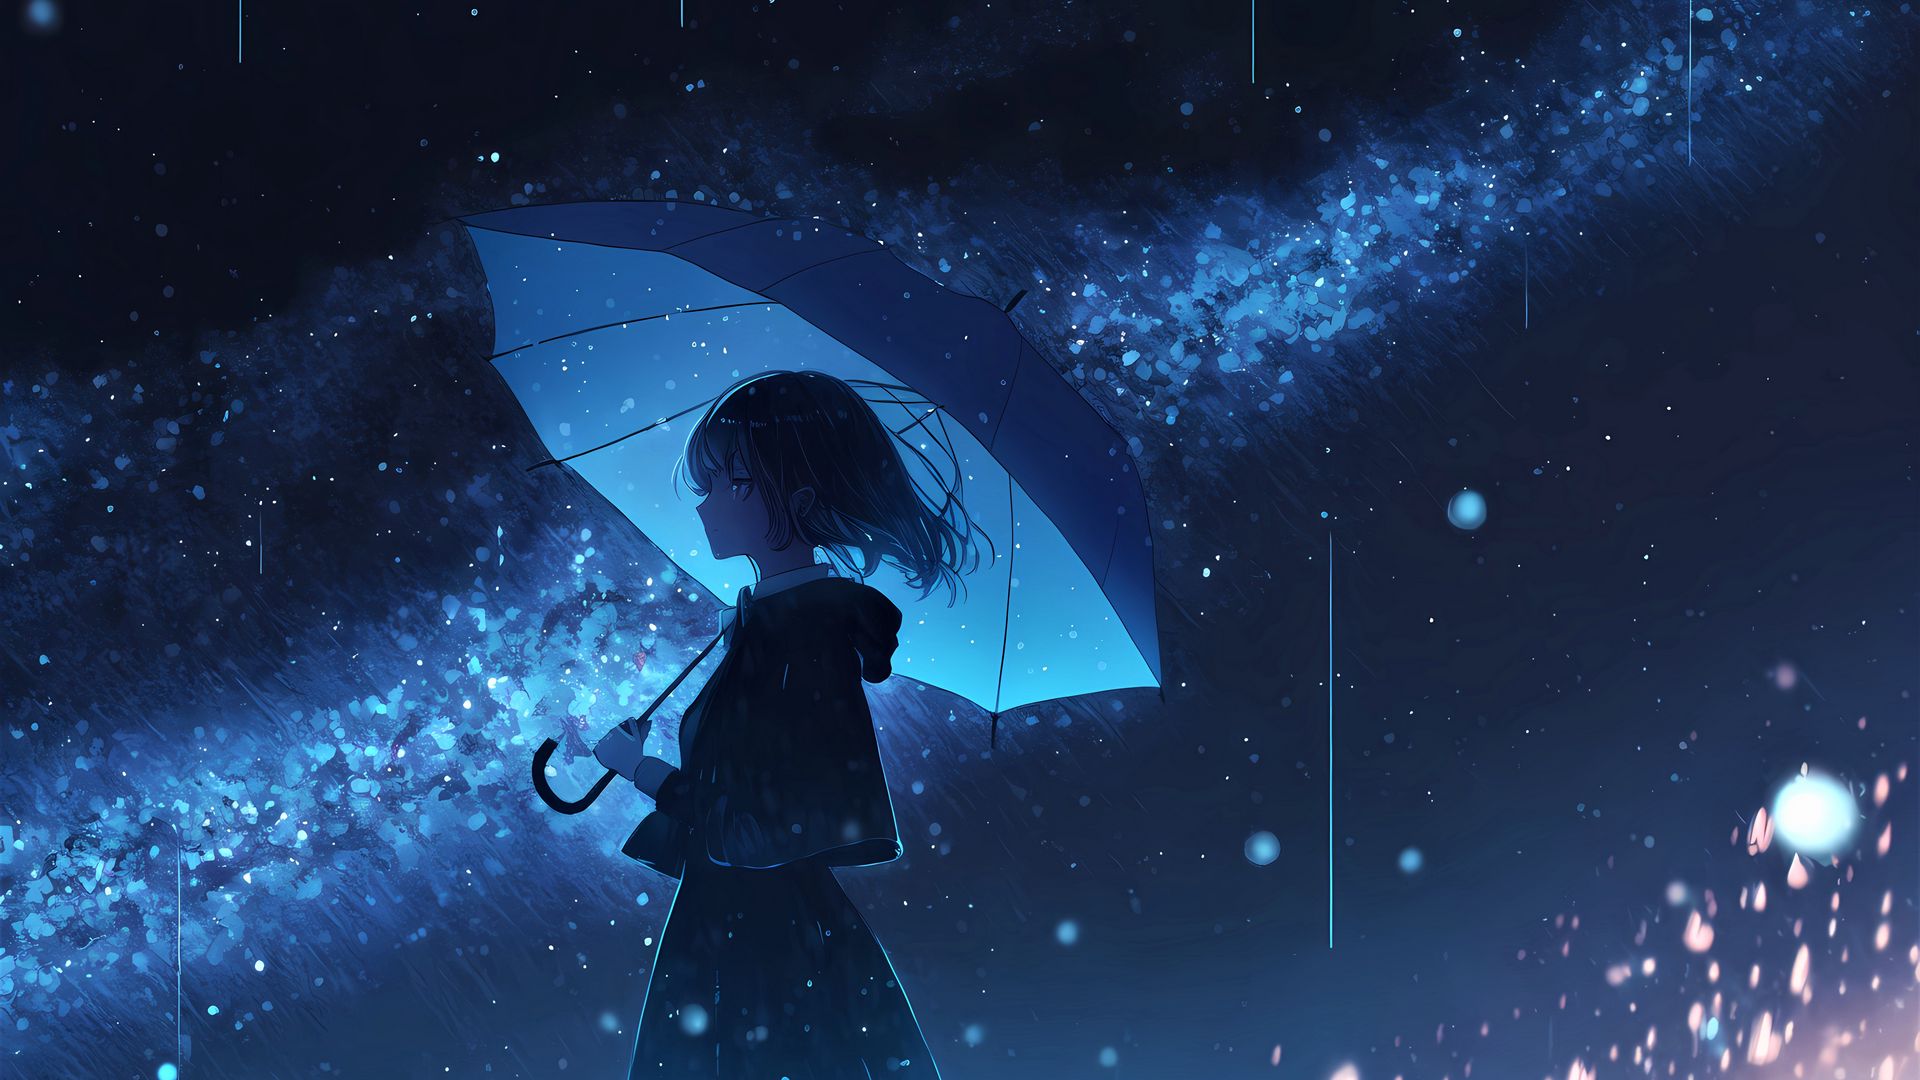 Collection of 50 Rainy day background anime for your phone and desktop